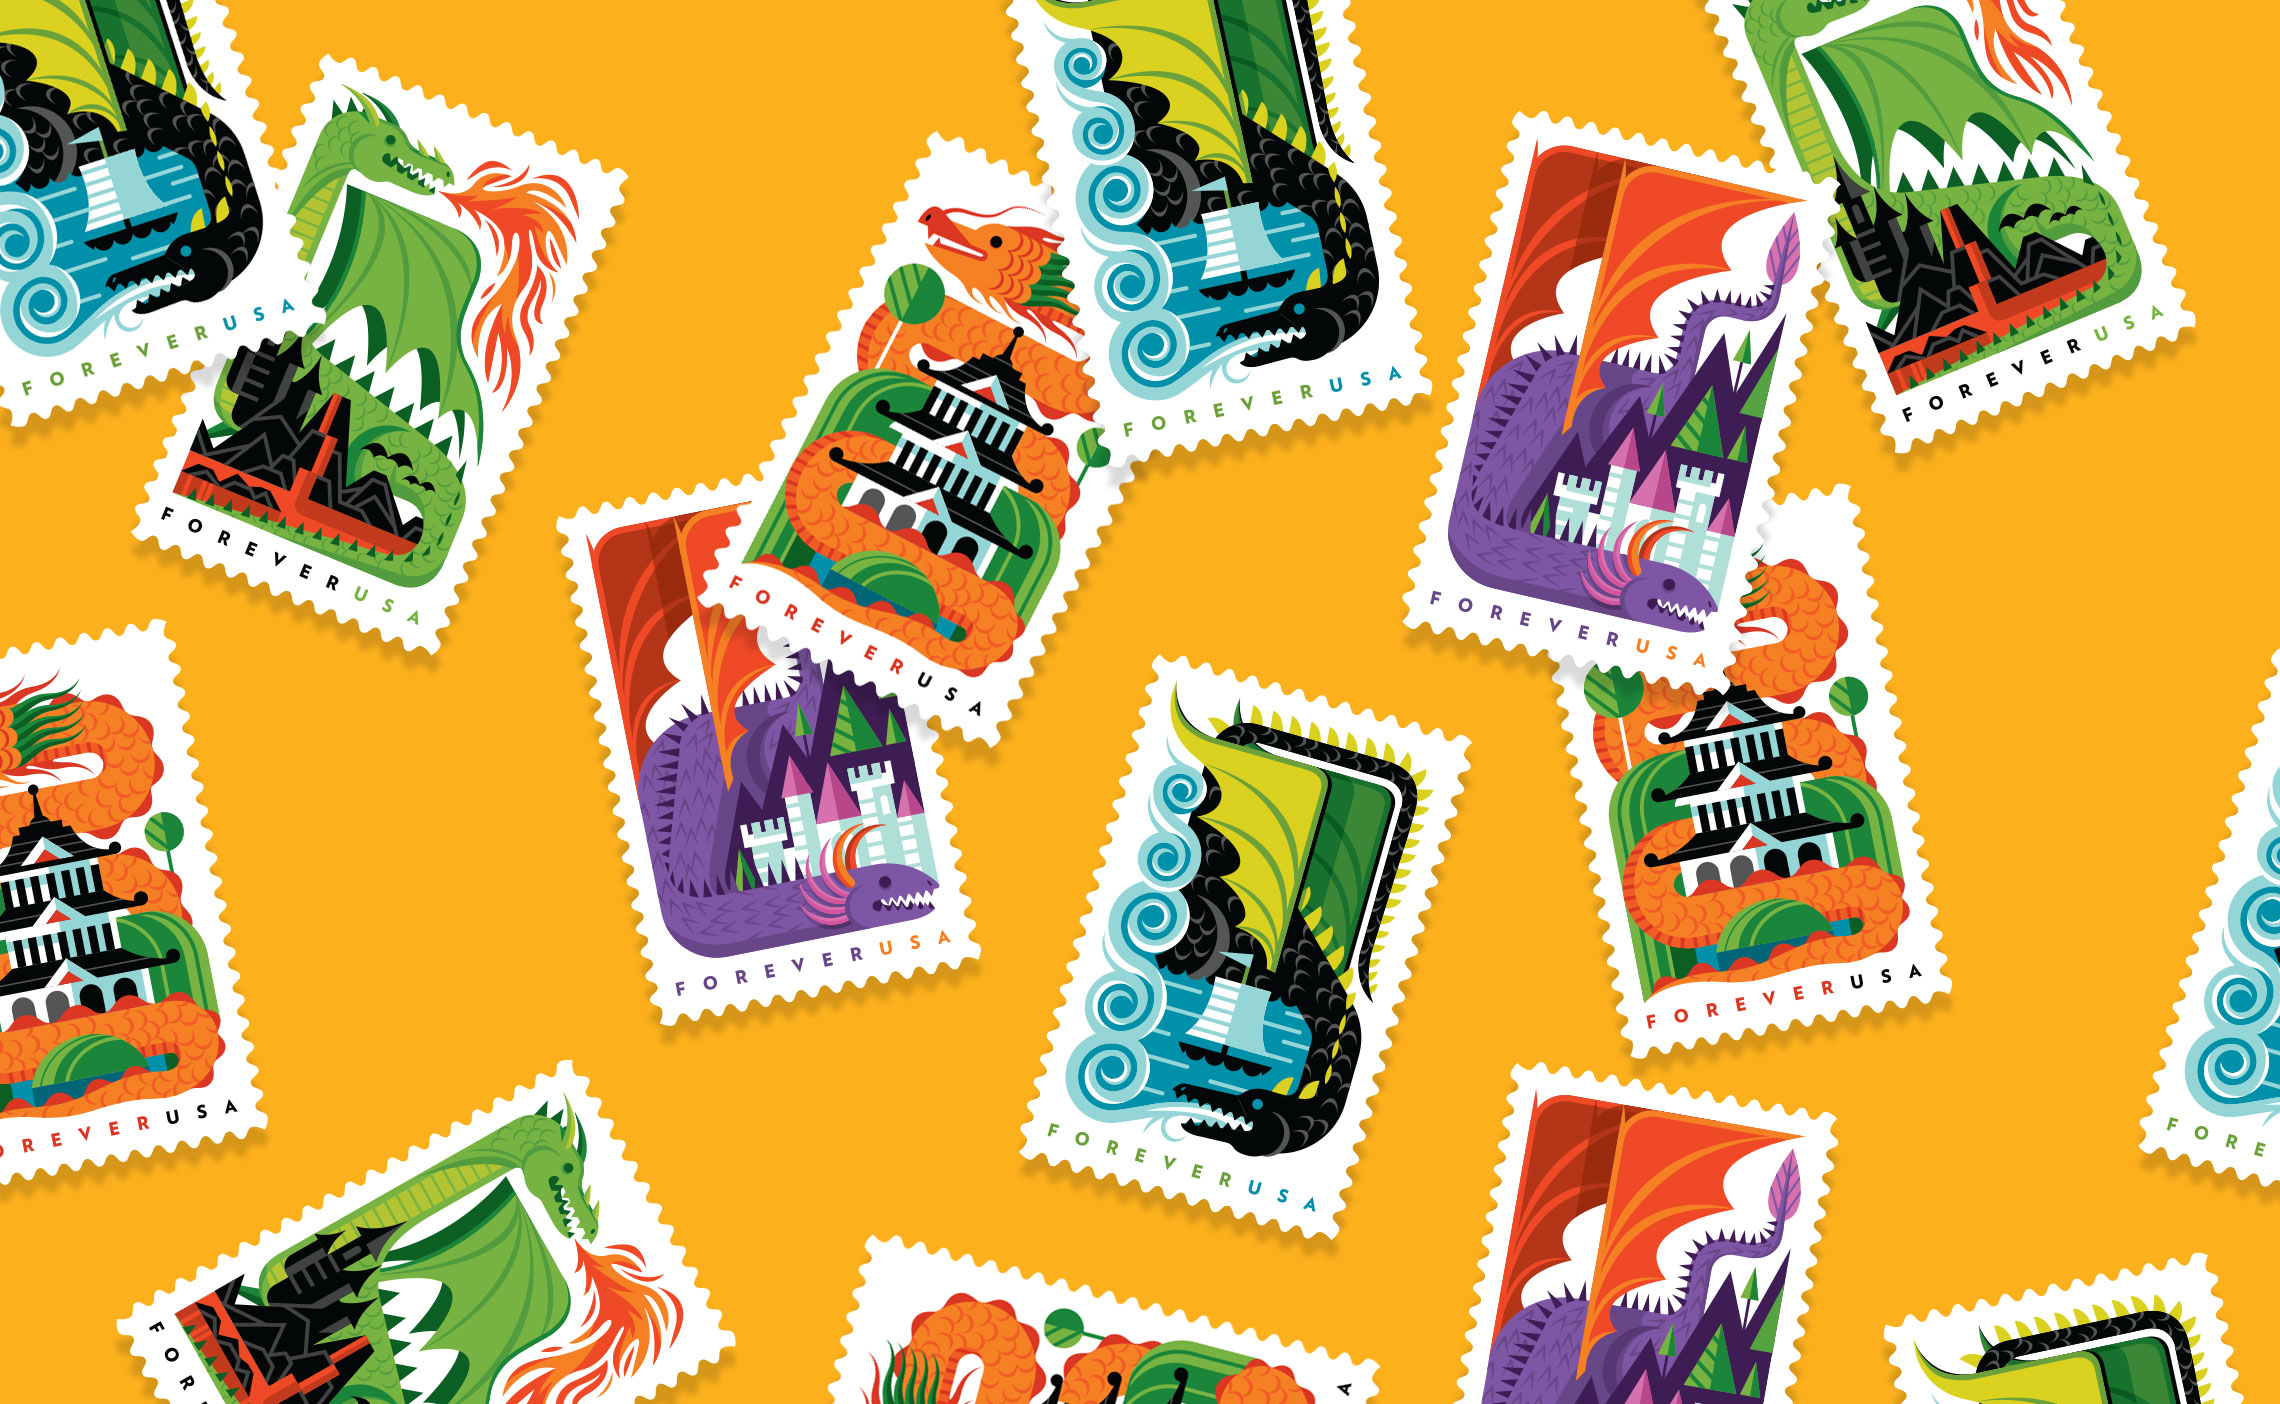 Invisible Creature + USPS “Dragons” Forever USA Postage Stamps